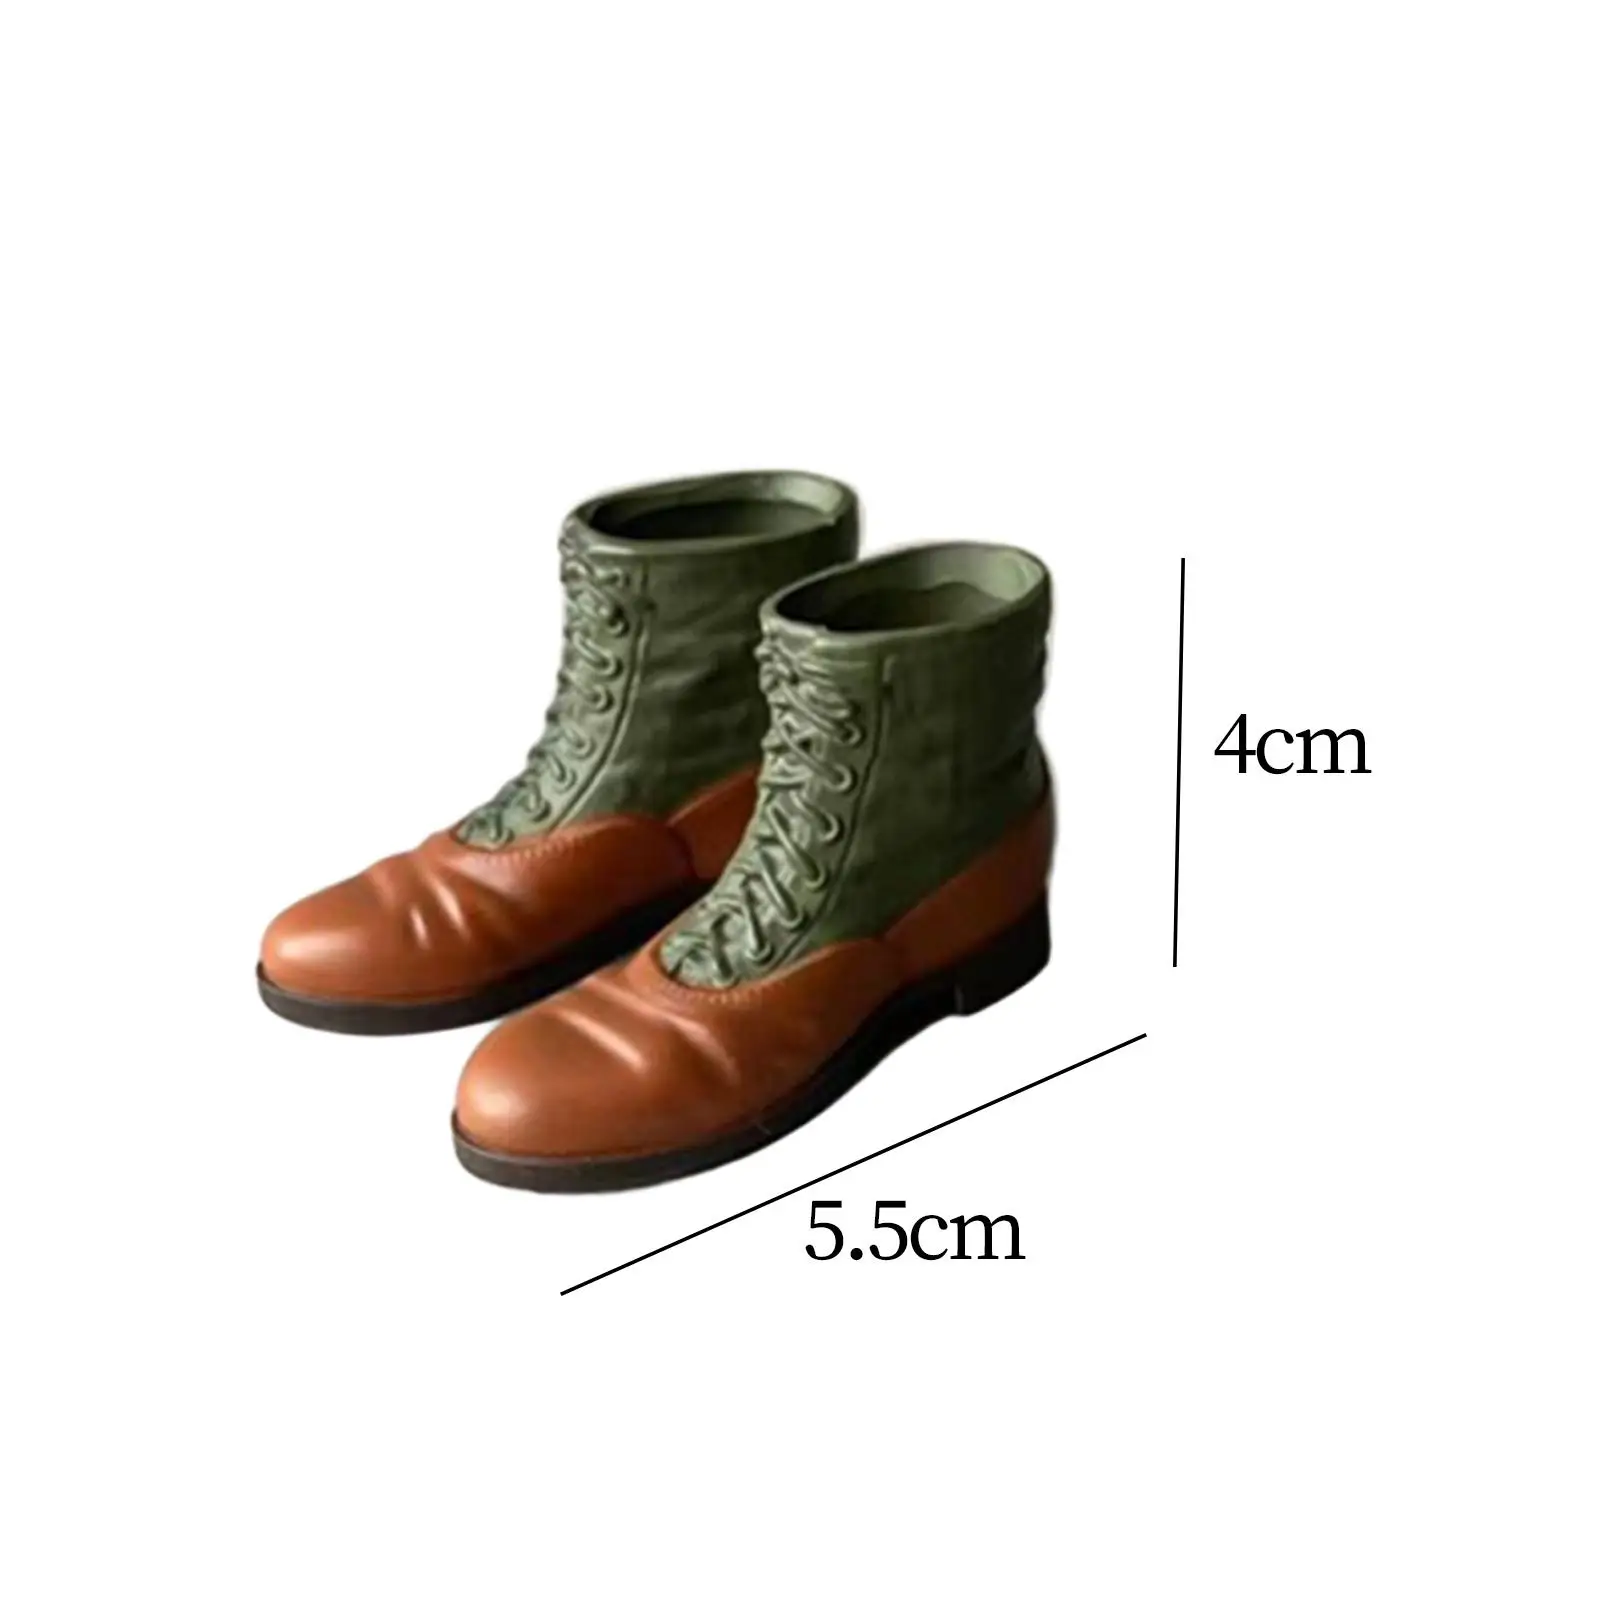 Action Figures Shoes 1/6 Scale Boots Fashion Handmade Doll Sneakers Model Doll Toy Doll Knight Boots for Supplies Activities